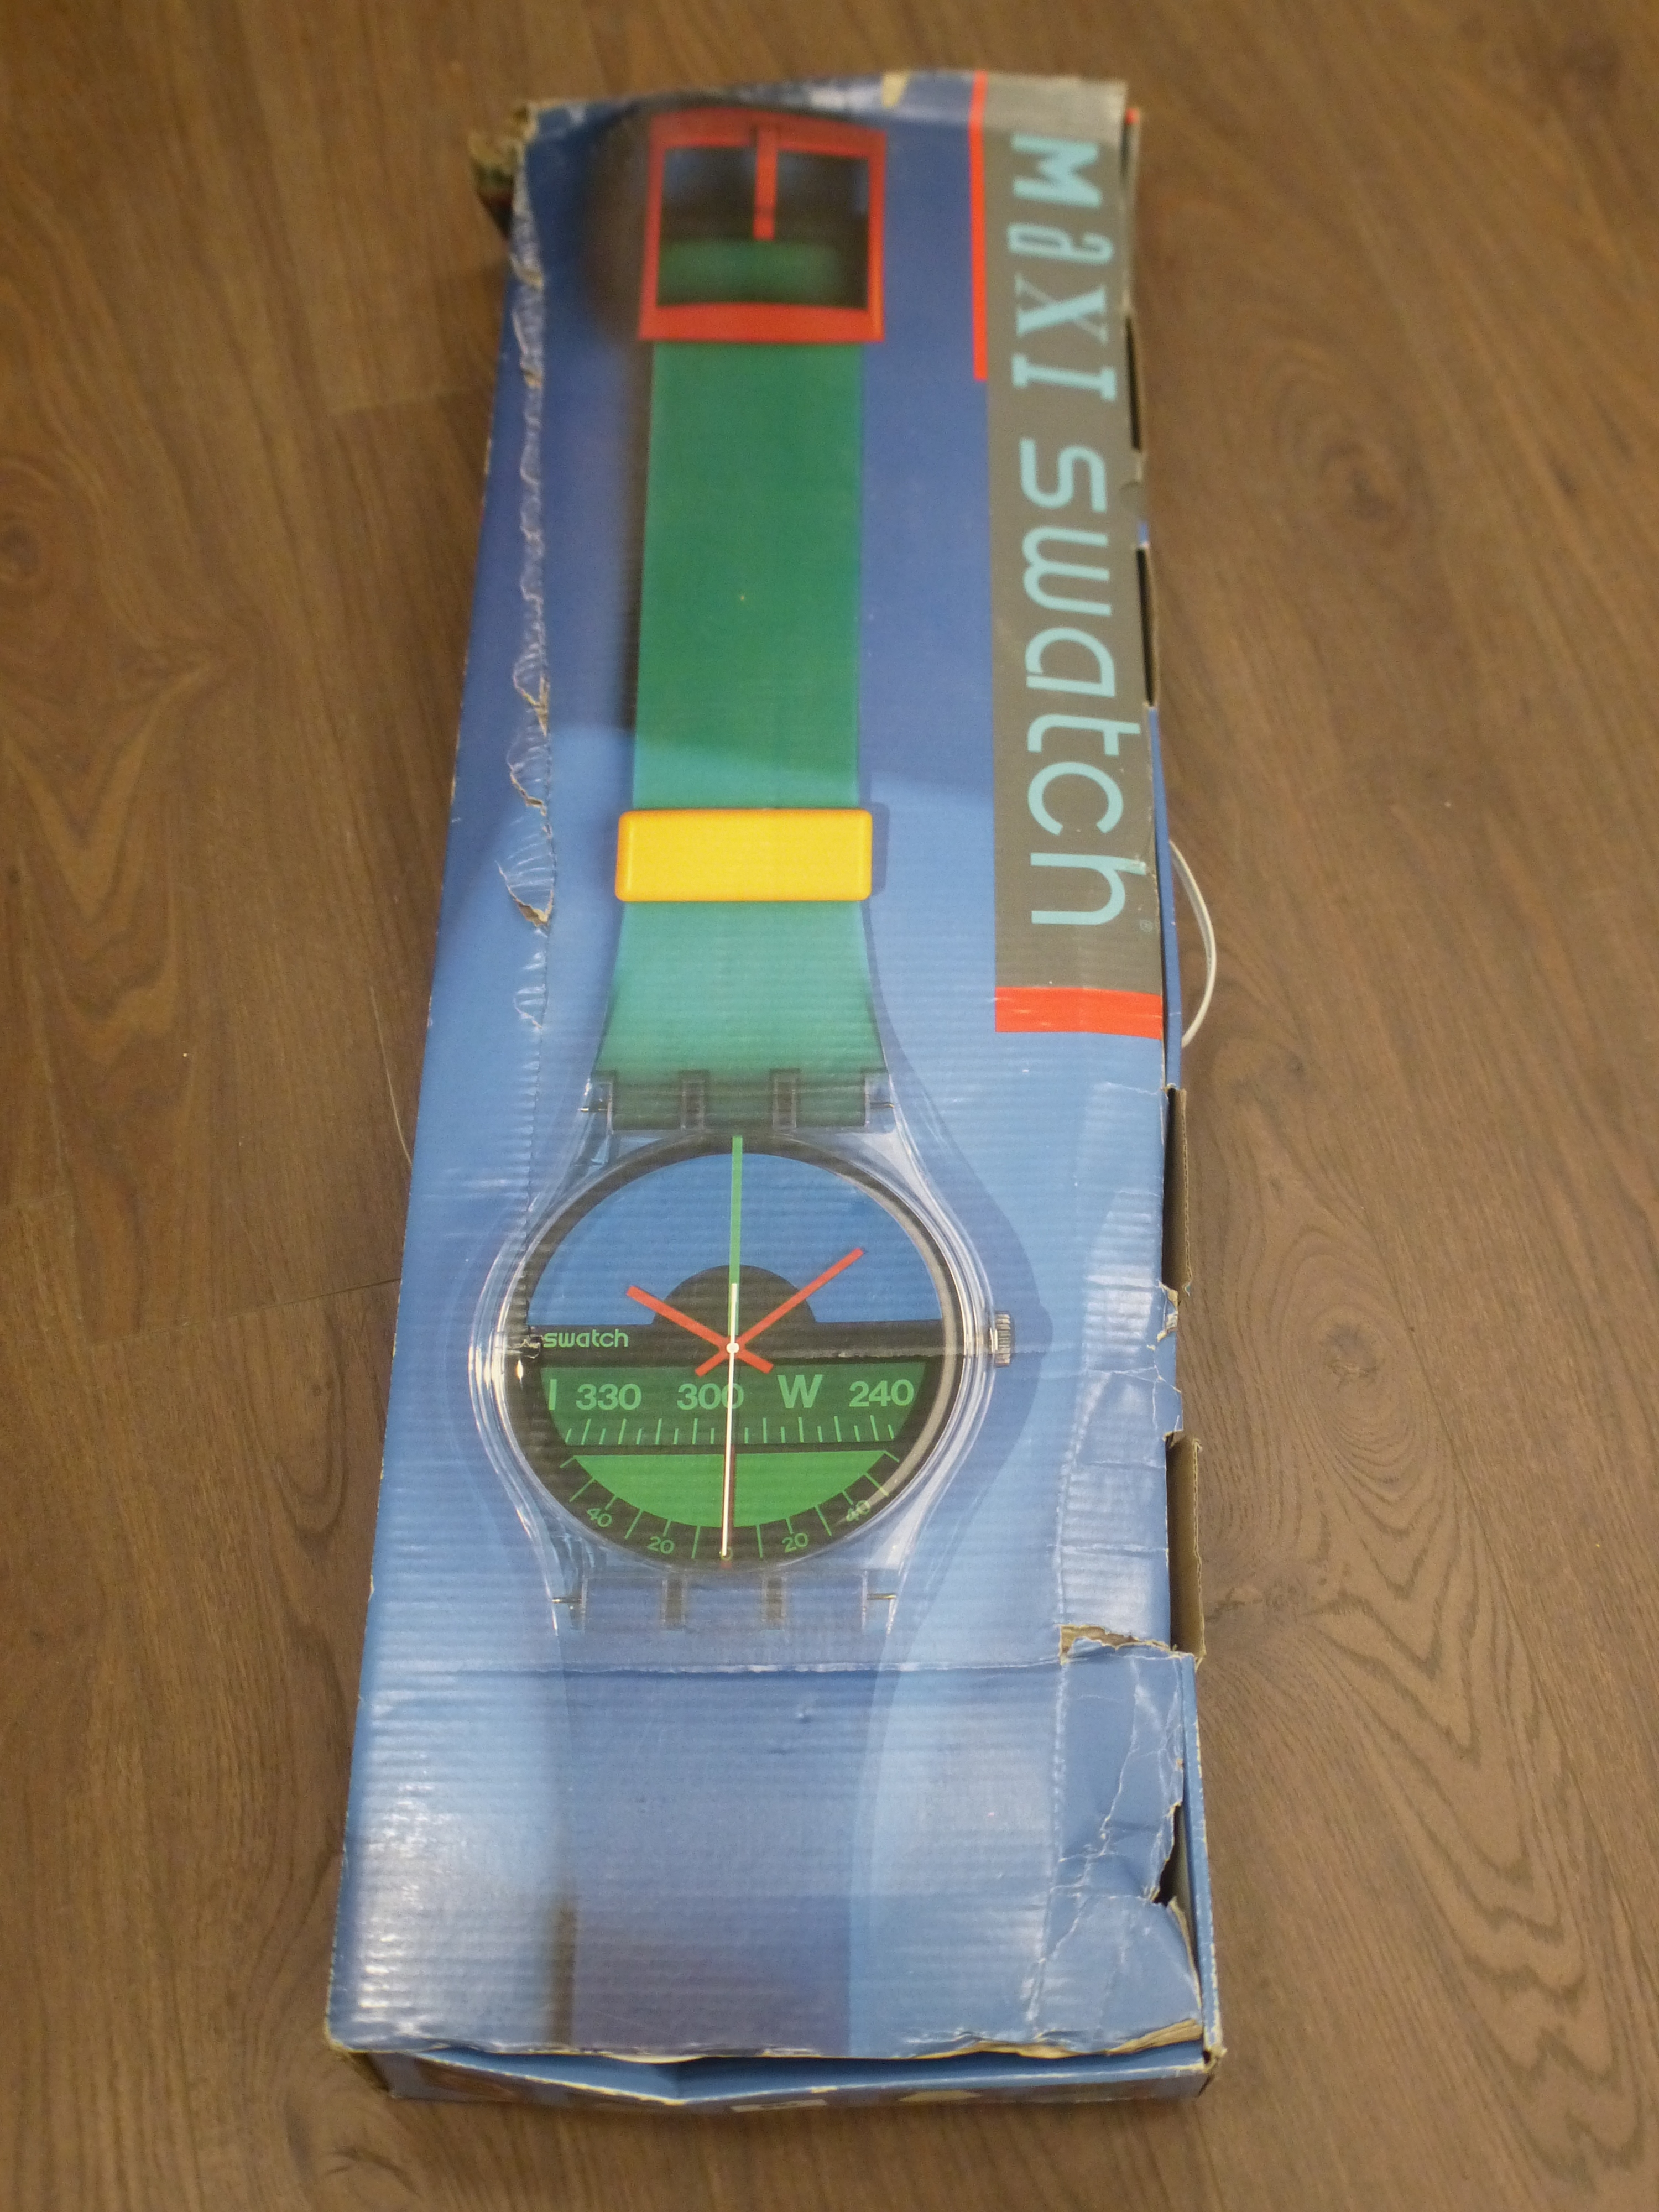 BOXED MAXI SWATCH WALL CLOCK